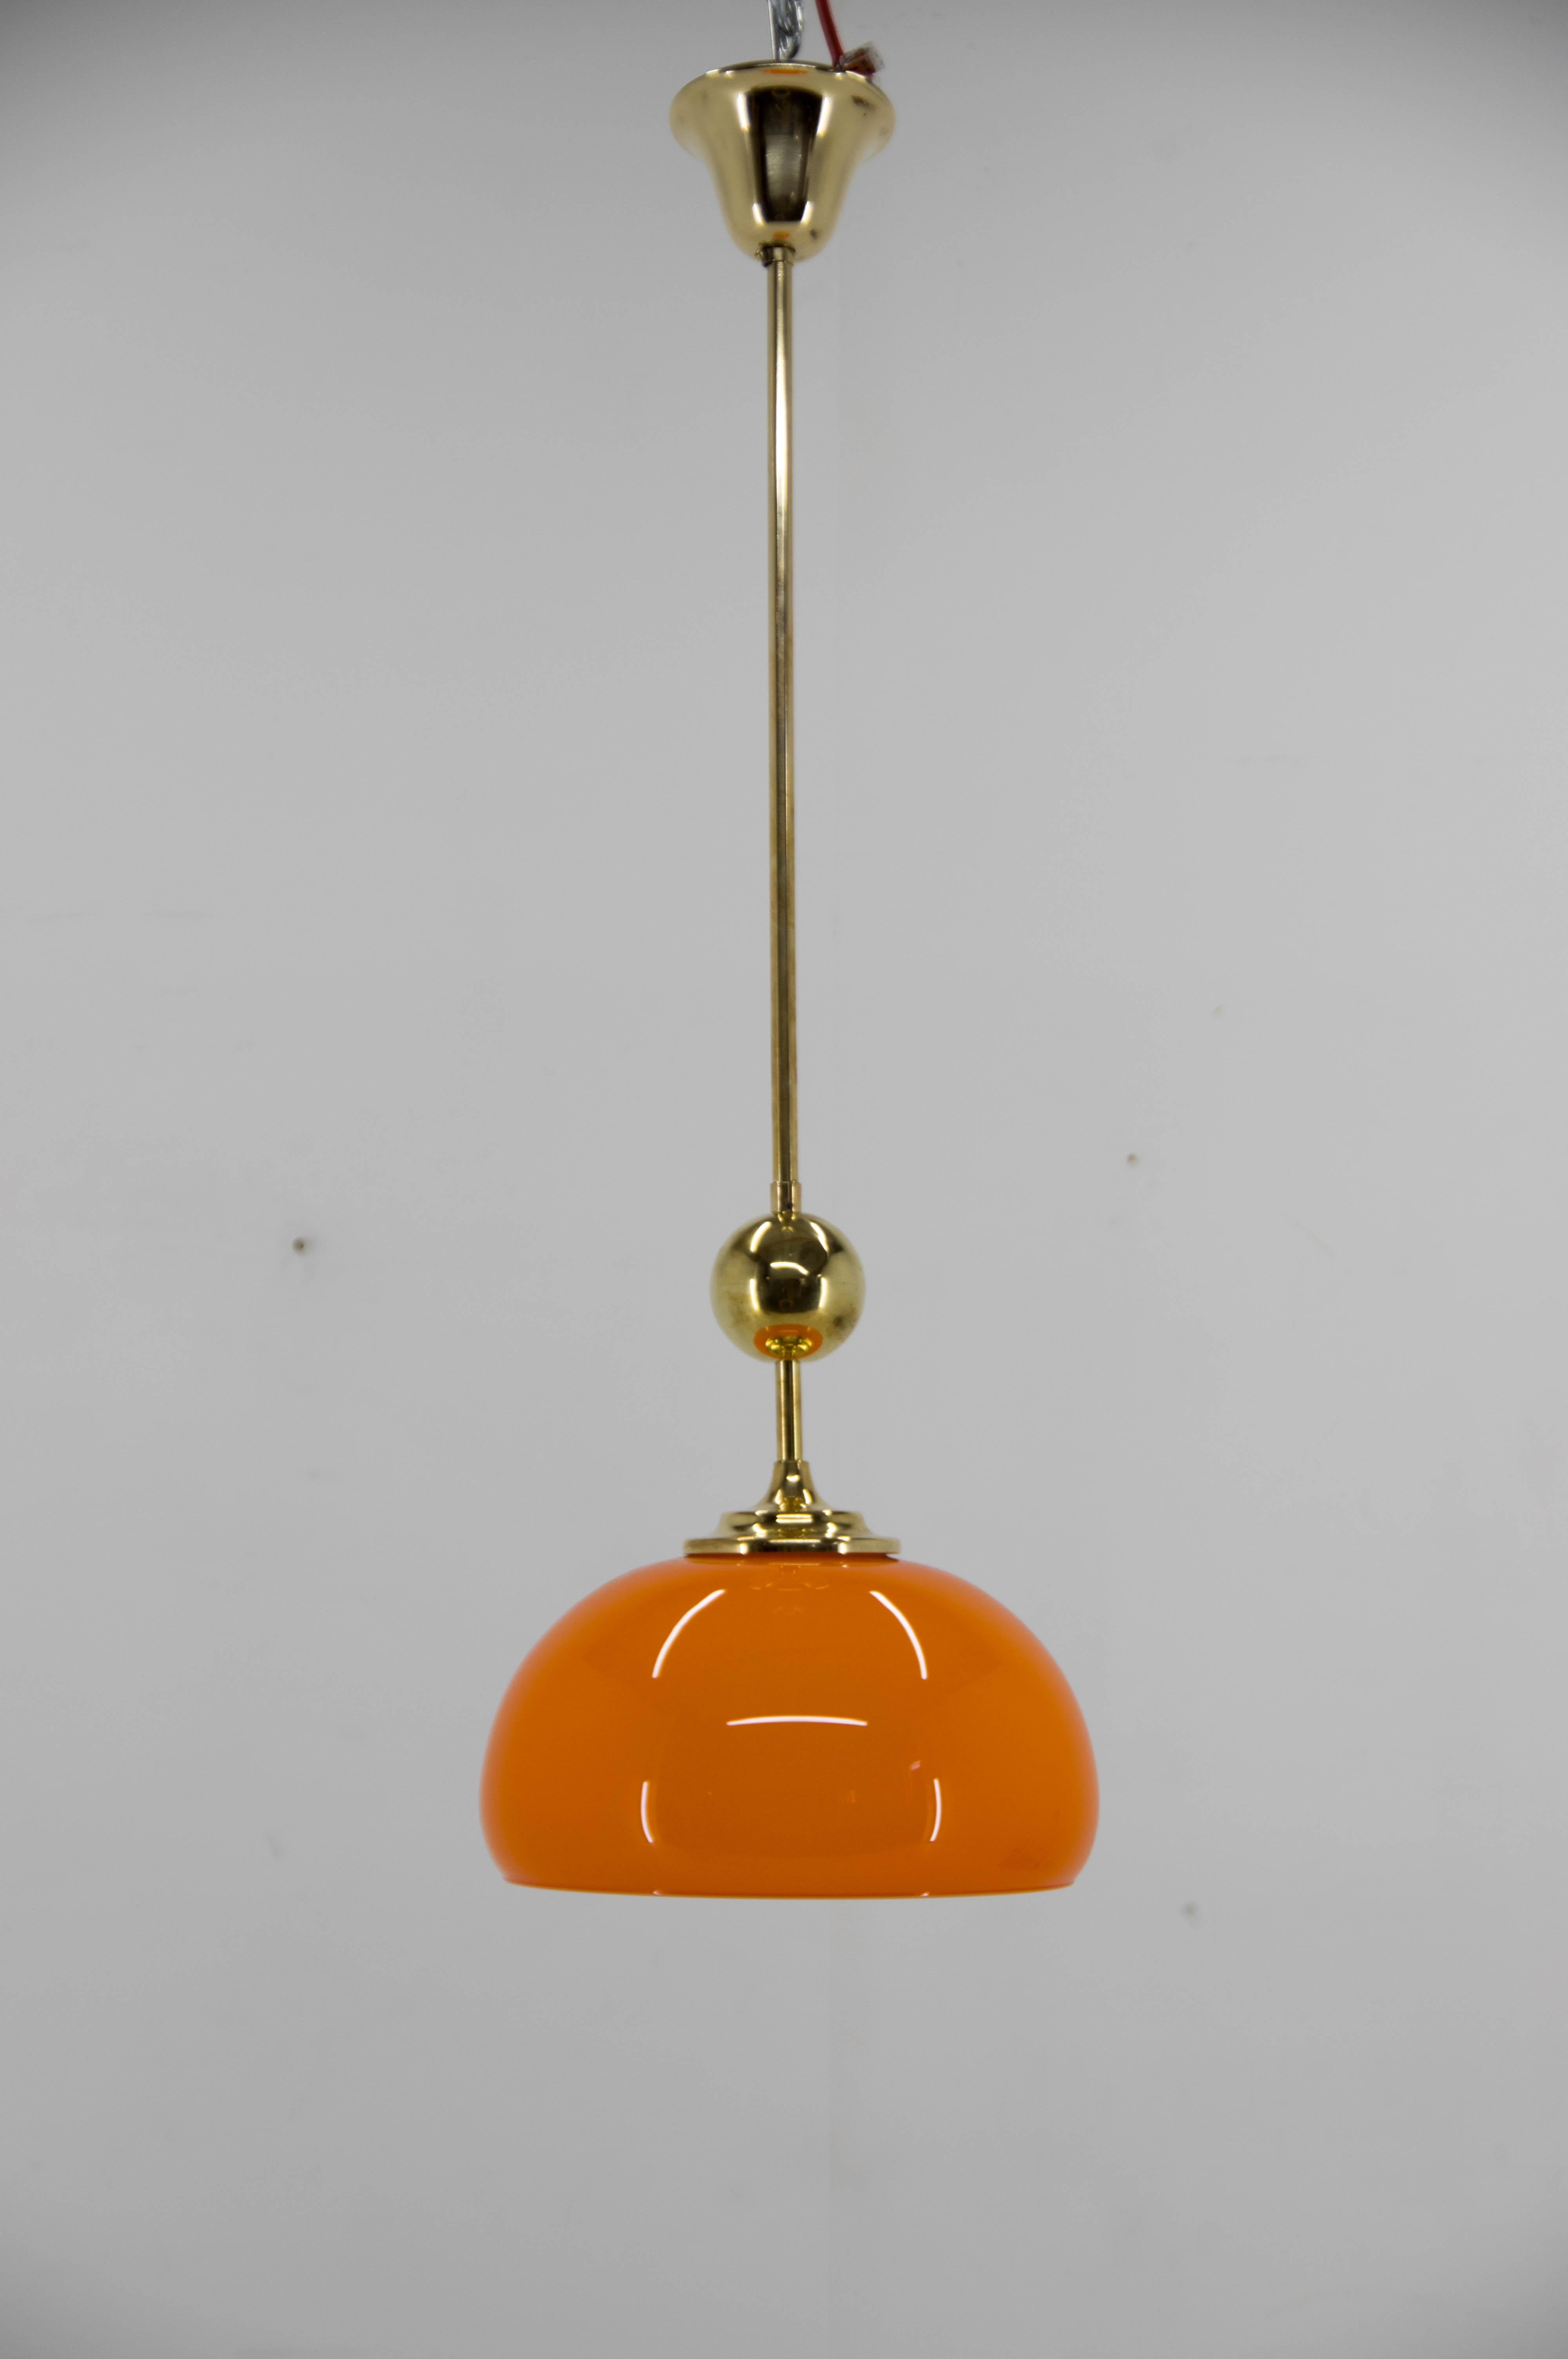 Orange pendant made in Czechoslovakia in 1980s.
Restored: brass refinished and polished.
Orange glass without any damage.
Rewired: 1x100W, E2-E27 bulb
US wiring compatible